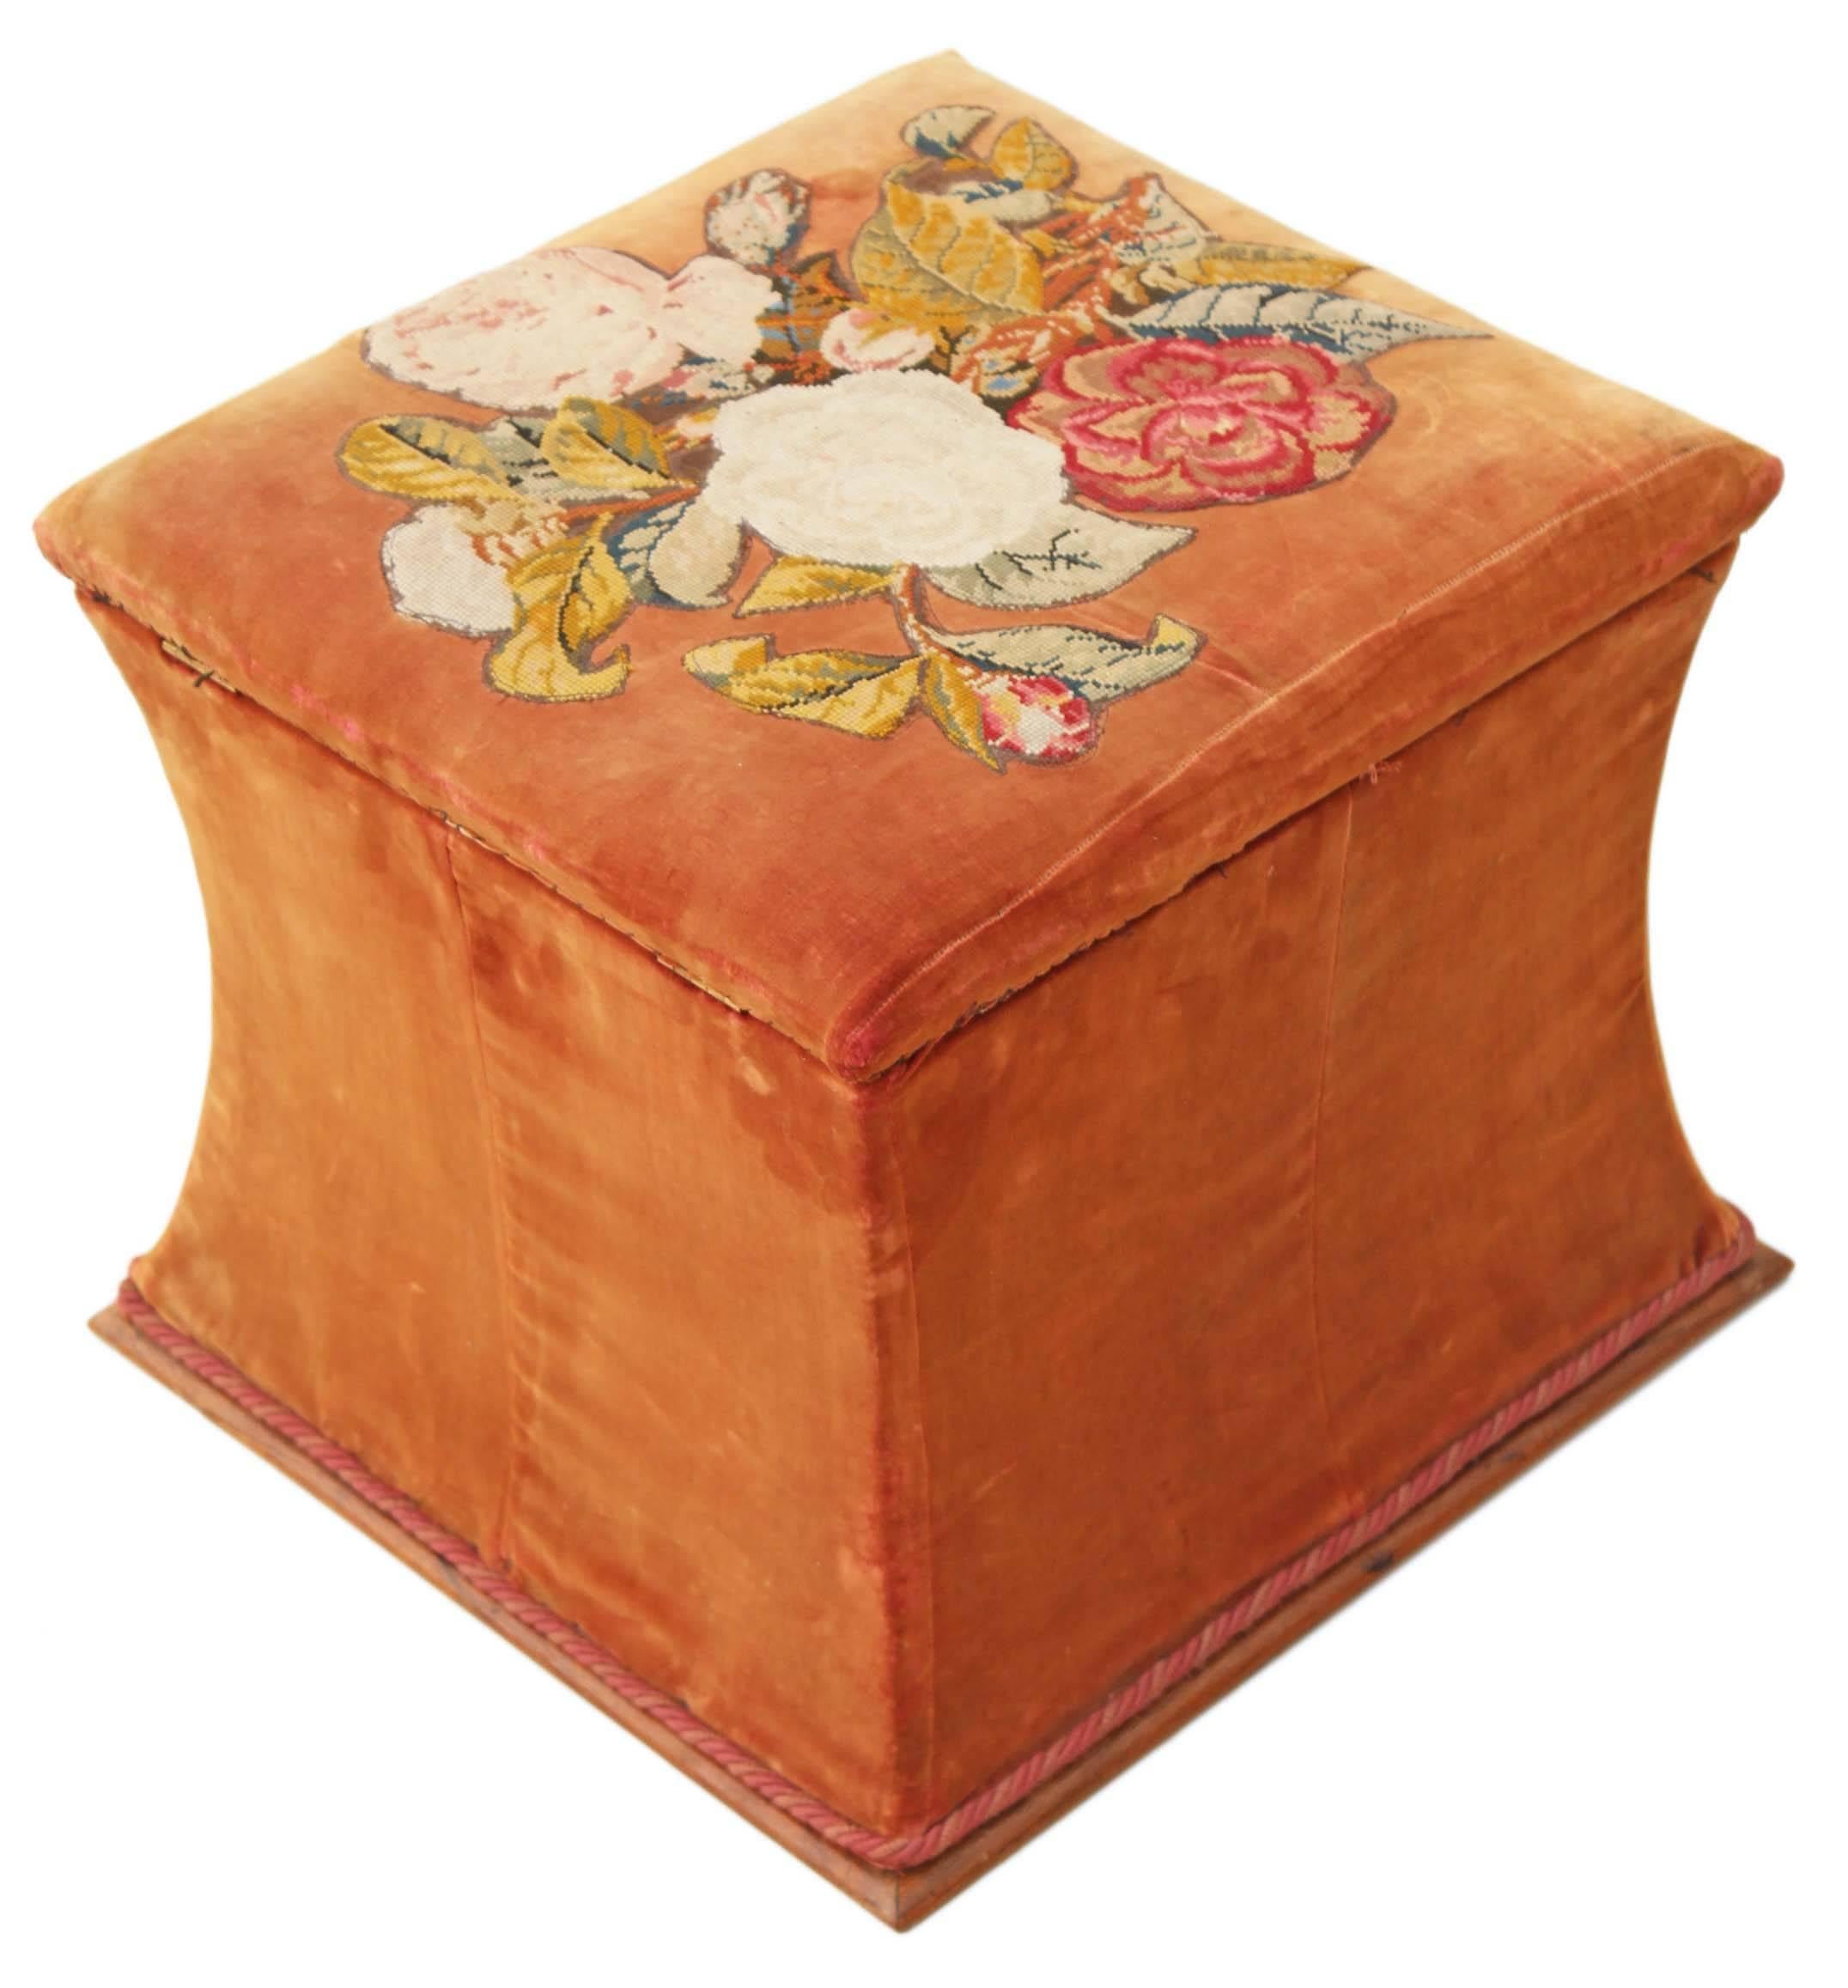 Antique Victorian Shaped Upholstered Needlepoint Ottoman Blanket Box In Good Condition For Sale In Wisbech, Walton Wisbech